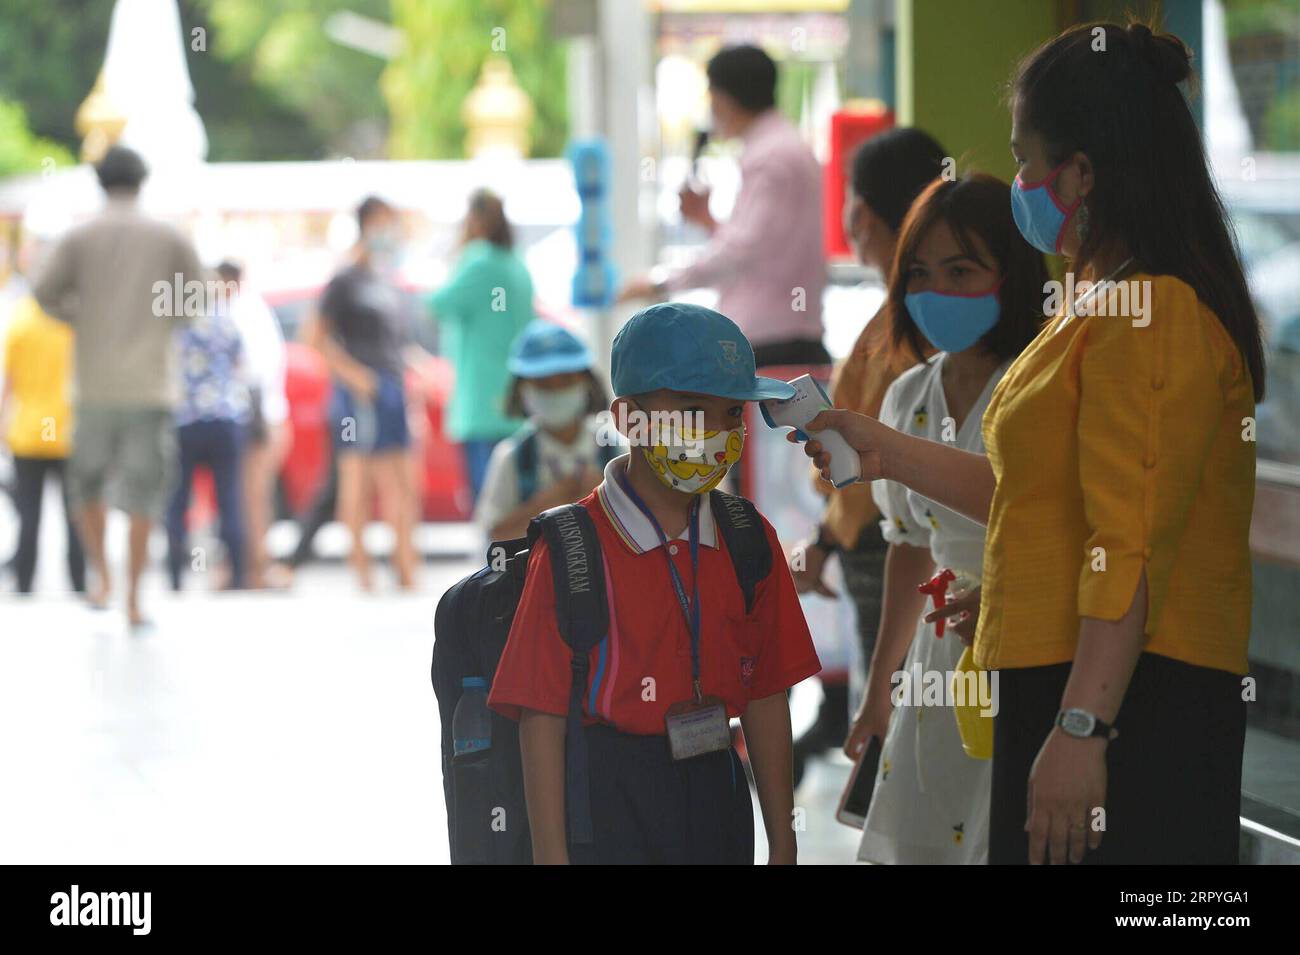 200701 -- BANGKOK, July 1, 2020 Xinhua -- A student has his temperature checked at the entrance of a school in Bangkok, Thailand, July 1, 2020. Schools in Thailand reopened on Wednesday. Xinhua/Rachen Sageamsak THAILAND-BANGKOK-COVID-19-SCHOOL-REOPENING PUBLICATIONxNOTxINxCHN Stock Photo